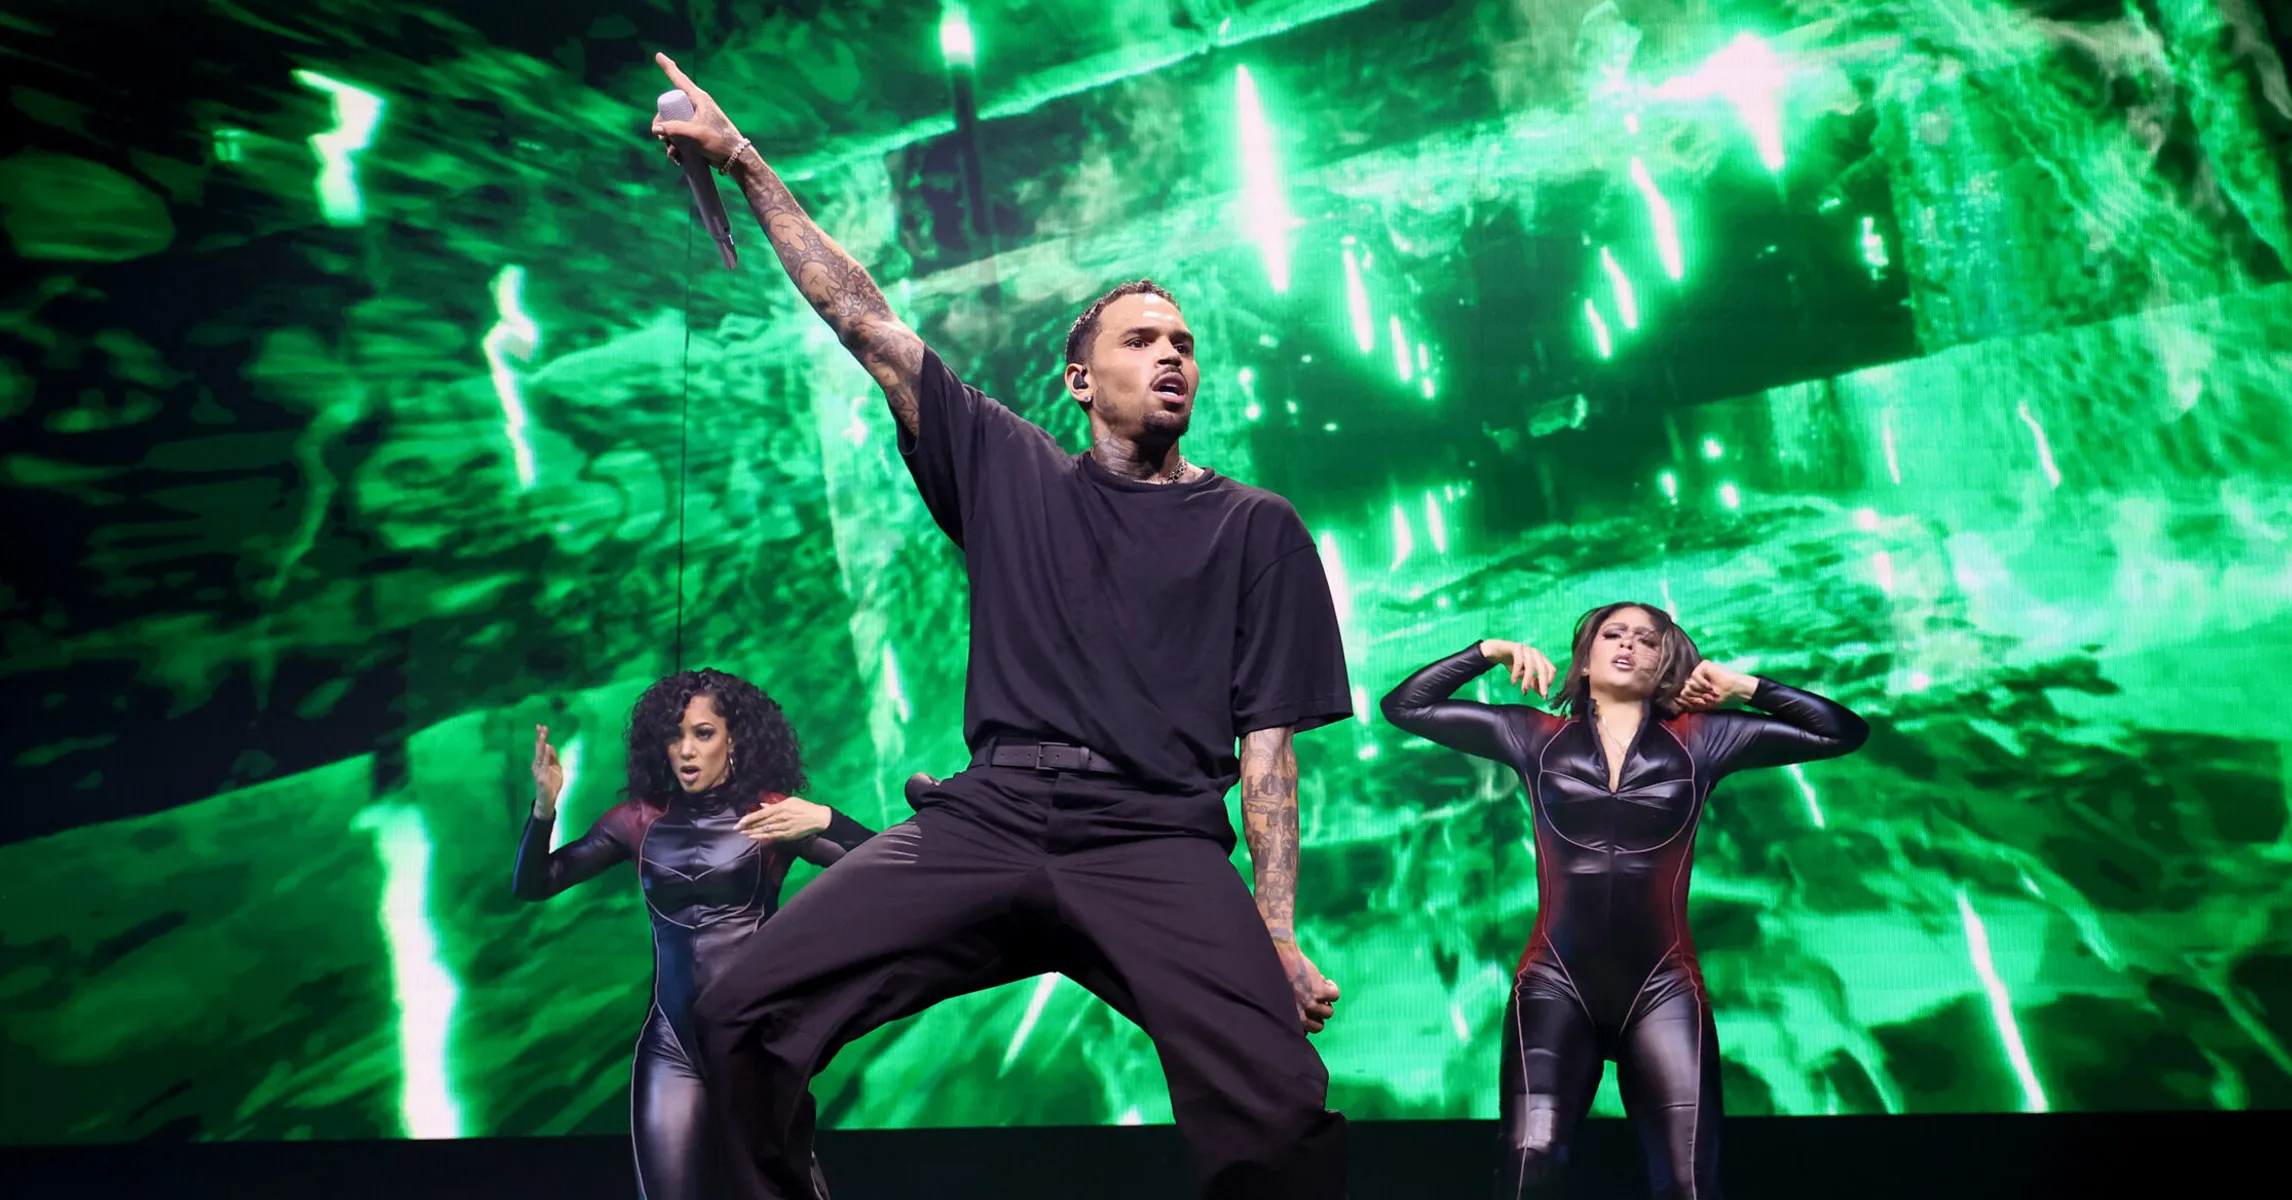 Chris Brown responds to thirsty fans who ask him to strip at his concerts